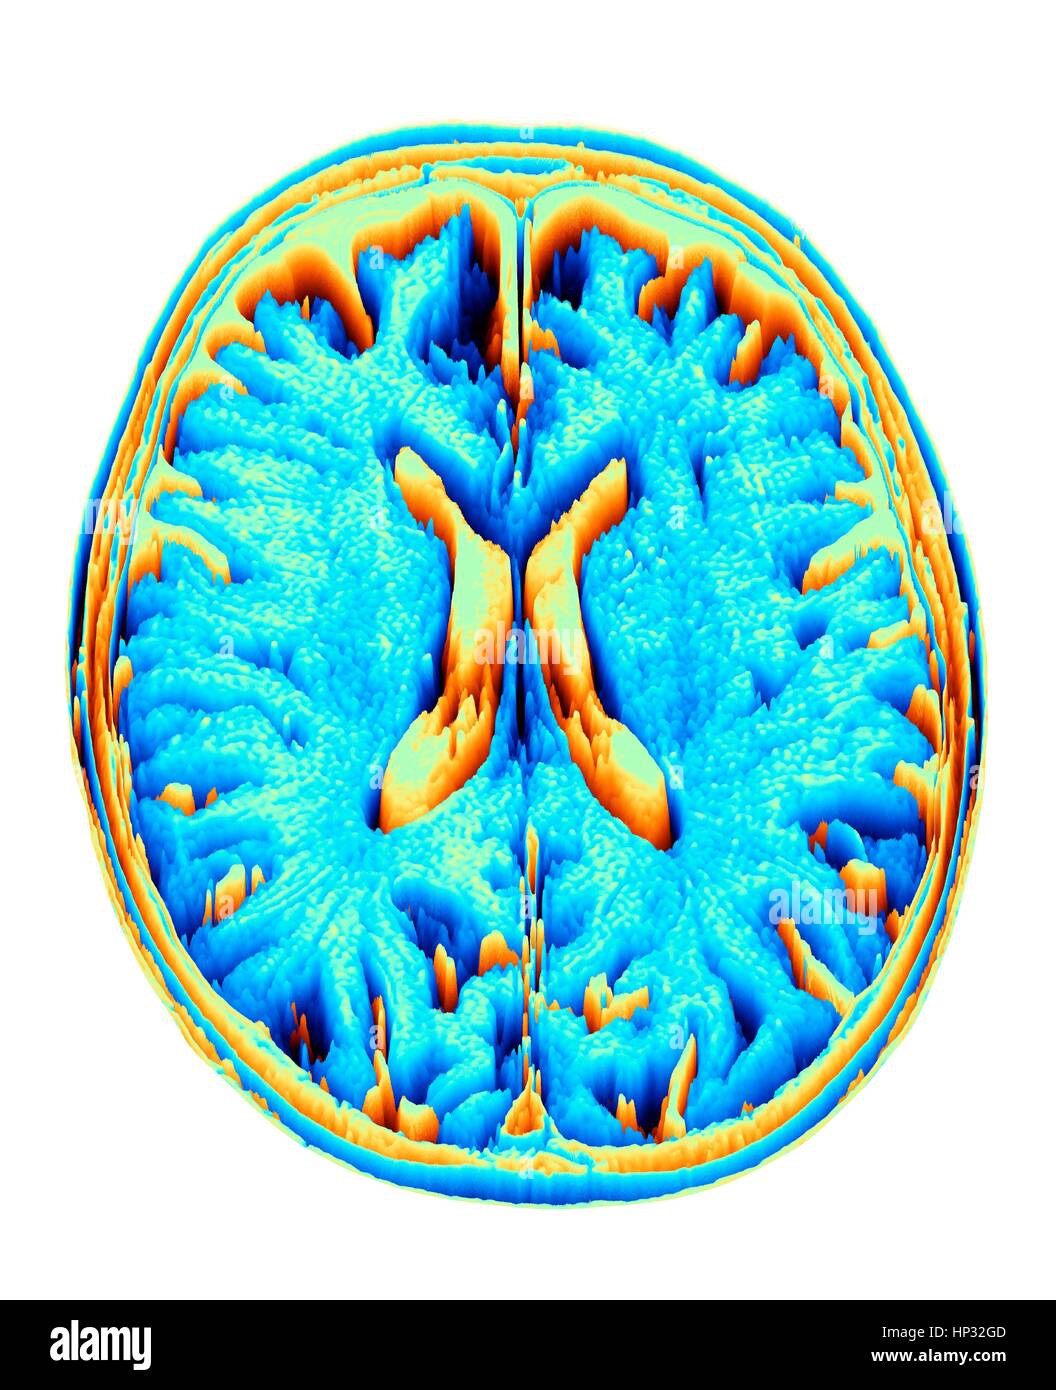 Normal brain. Coloured magnetic resonance imaging (MRI) scan of an axial section through a healthy brain, converted into a heightmap or height field. The images shows the cortex and lateral ventricle (X-shaped in the middle). Stock Photo